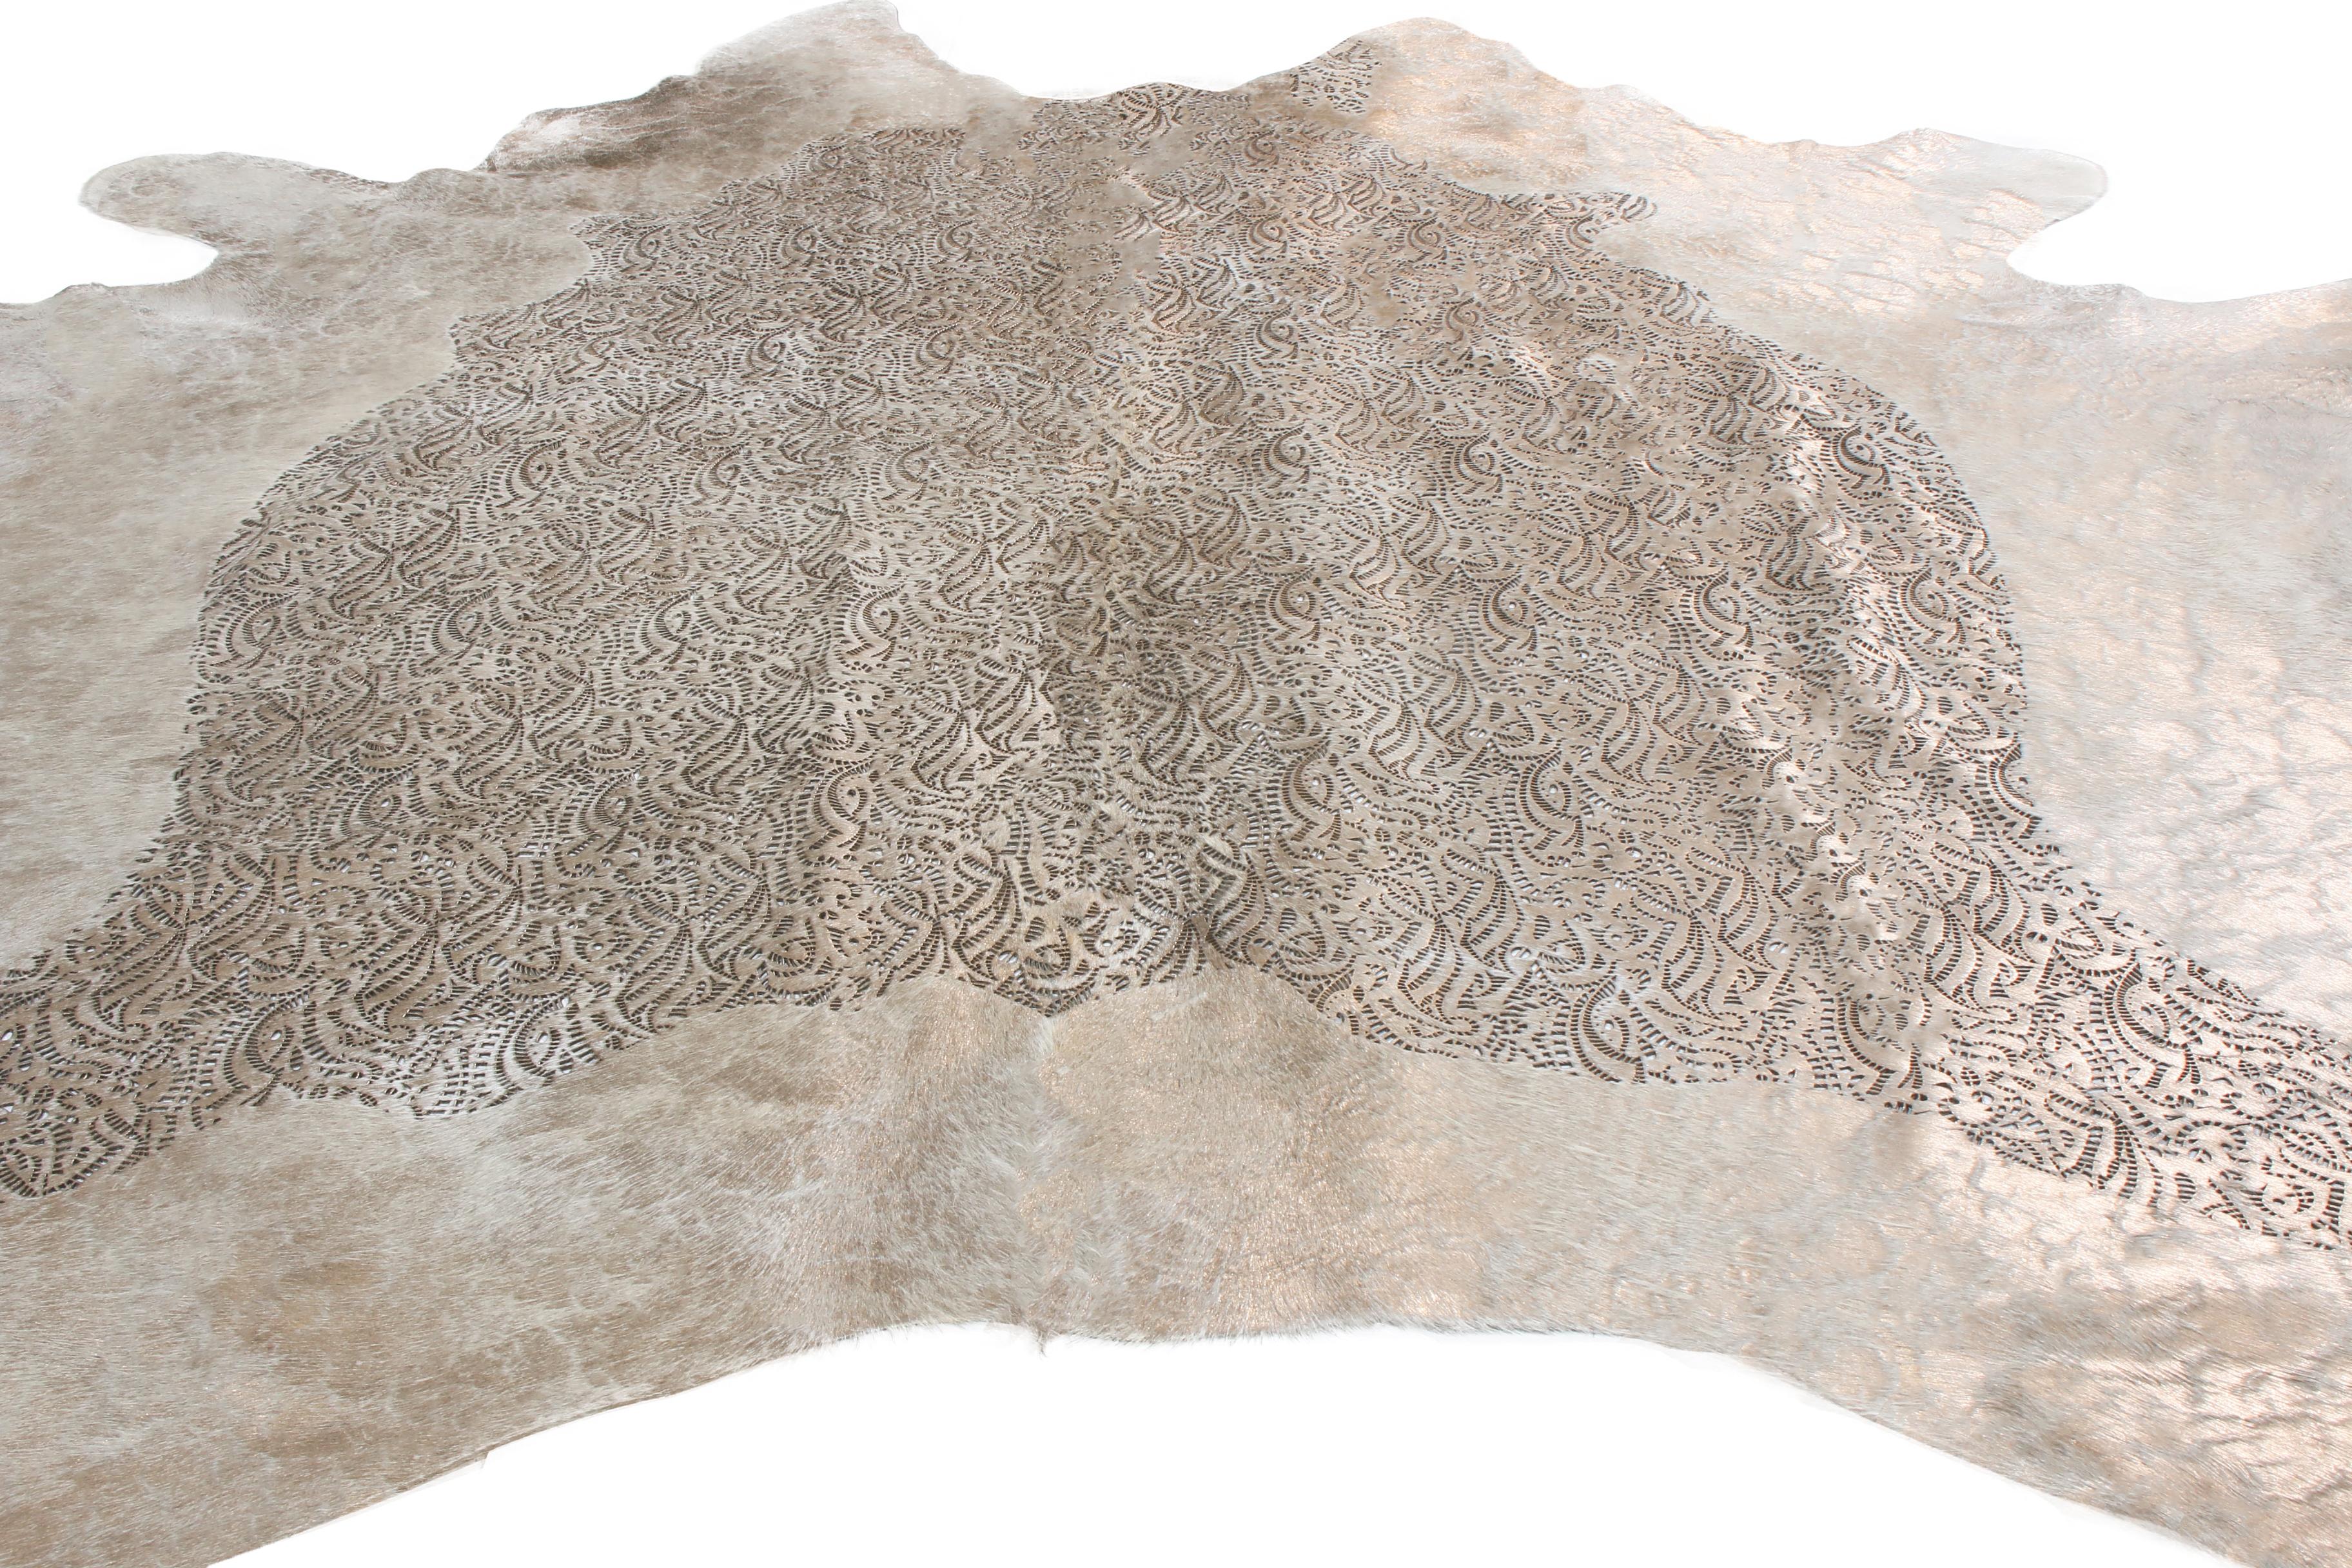 Originating from the United States, this contemporary leather cowhide rug has natural white colourways with minimal gray, metallic accents to its hide; a distinct stylistic addition for more modern, luxurious spaces. This tannery maintained the